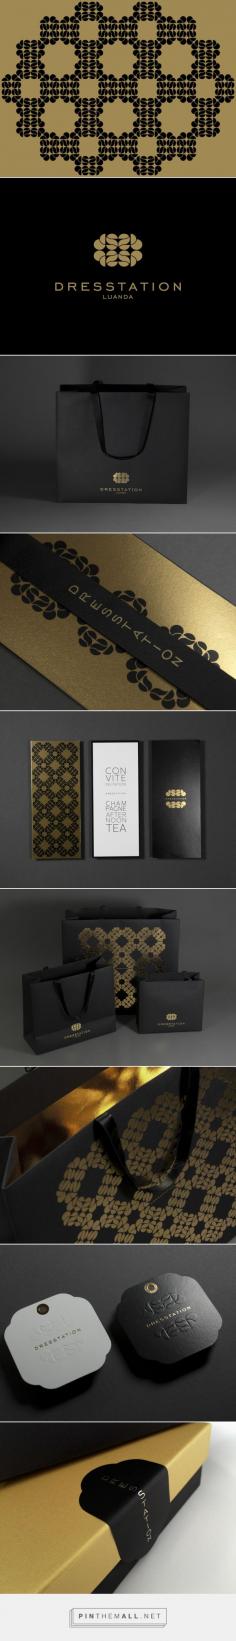 
                    
                        Dresstation Luanda branding packaging ID on Packaging Design Served curated by Packaging Diva PD. This is gorgeous packaging for a luxury brand in Luanda, Angola.
                    
                